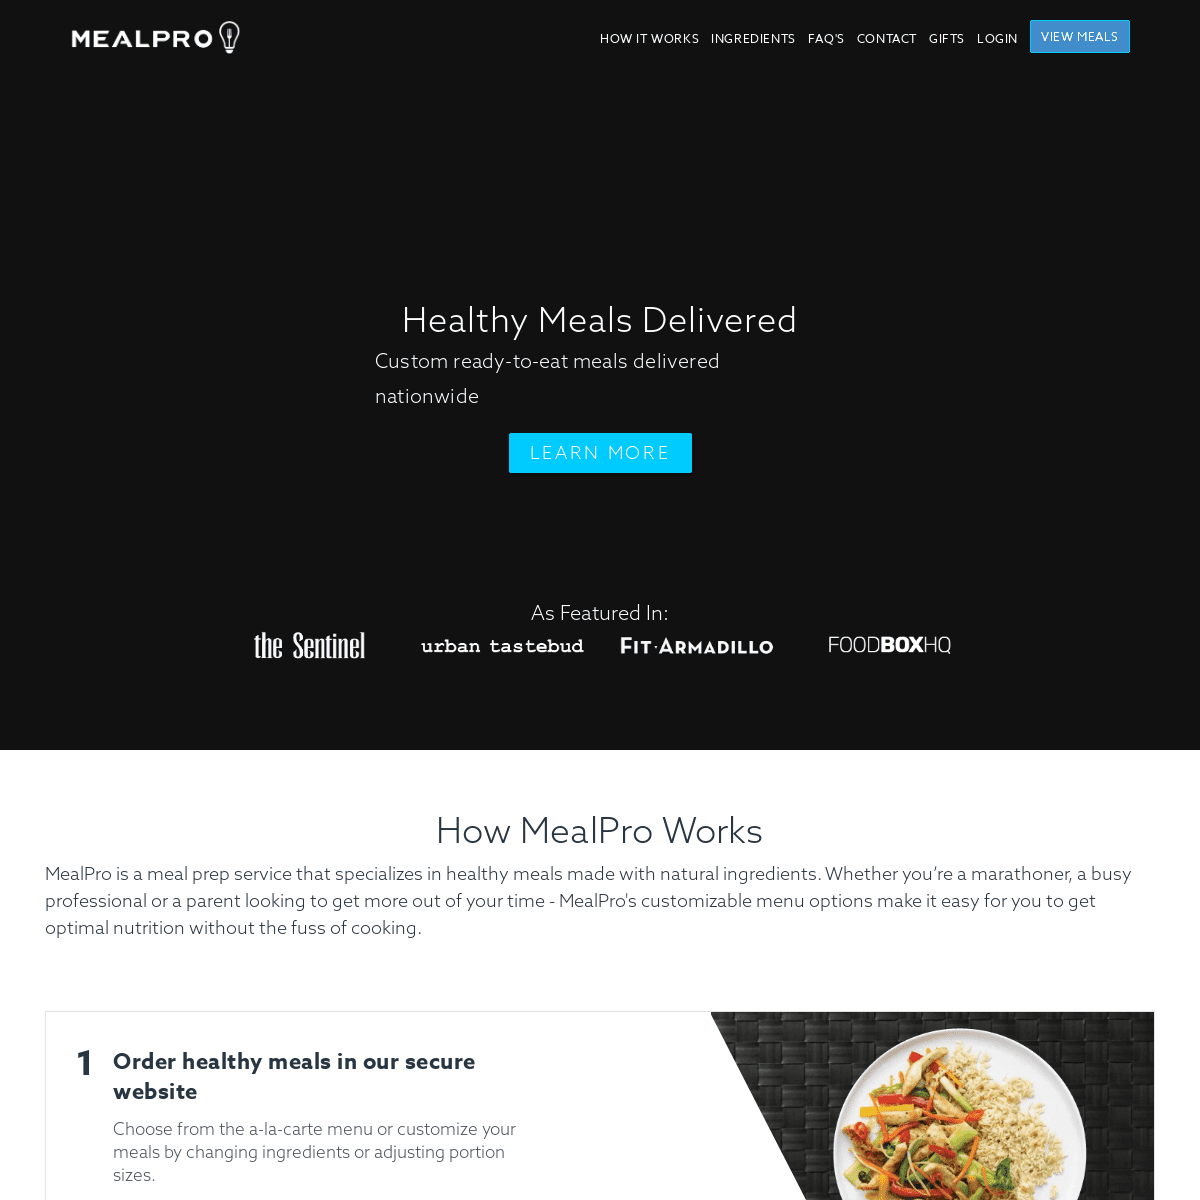 A complete backup of mealpro.net